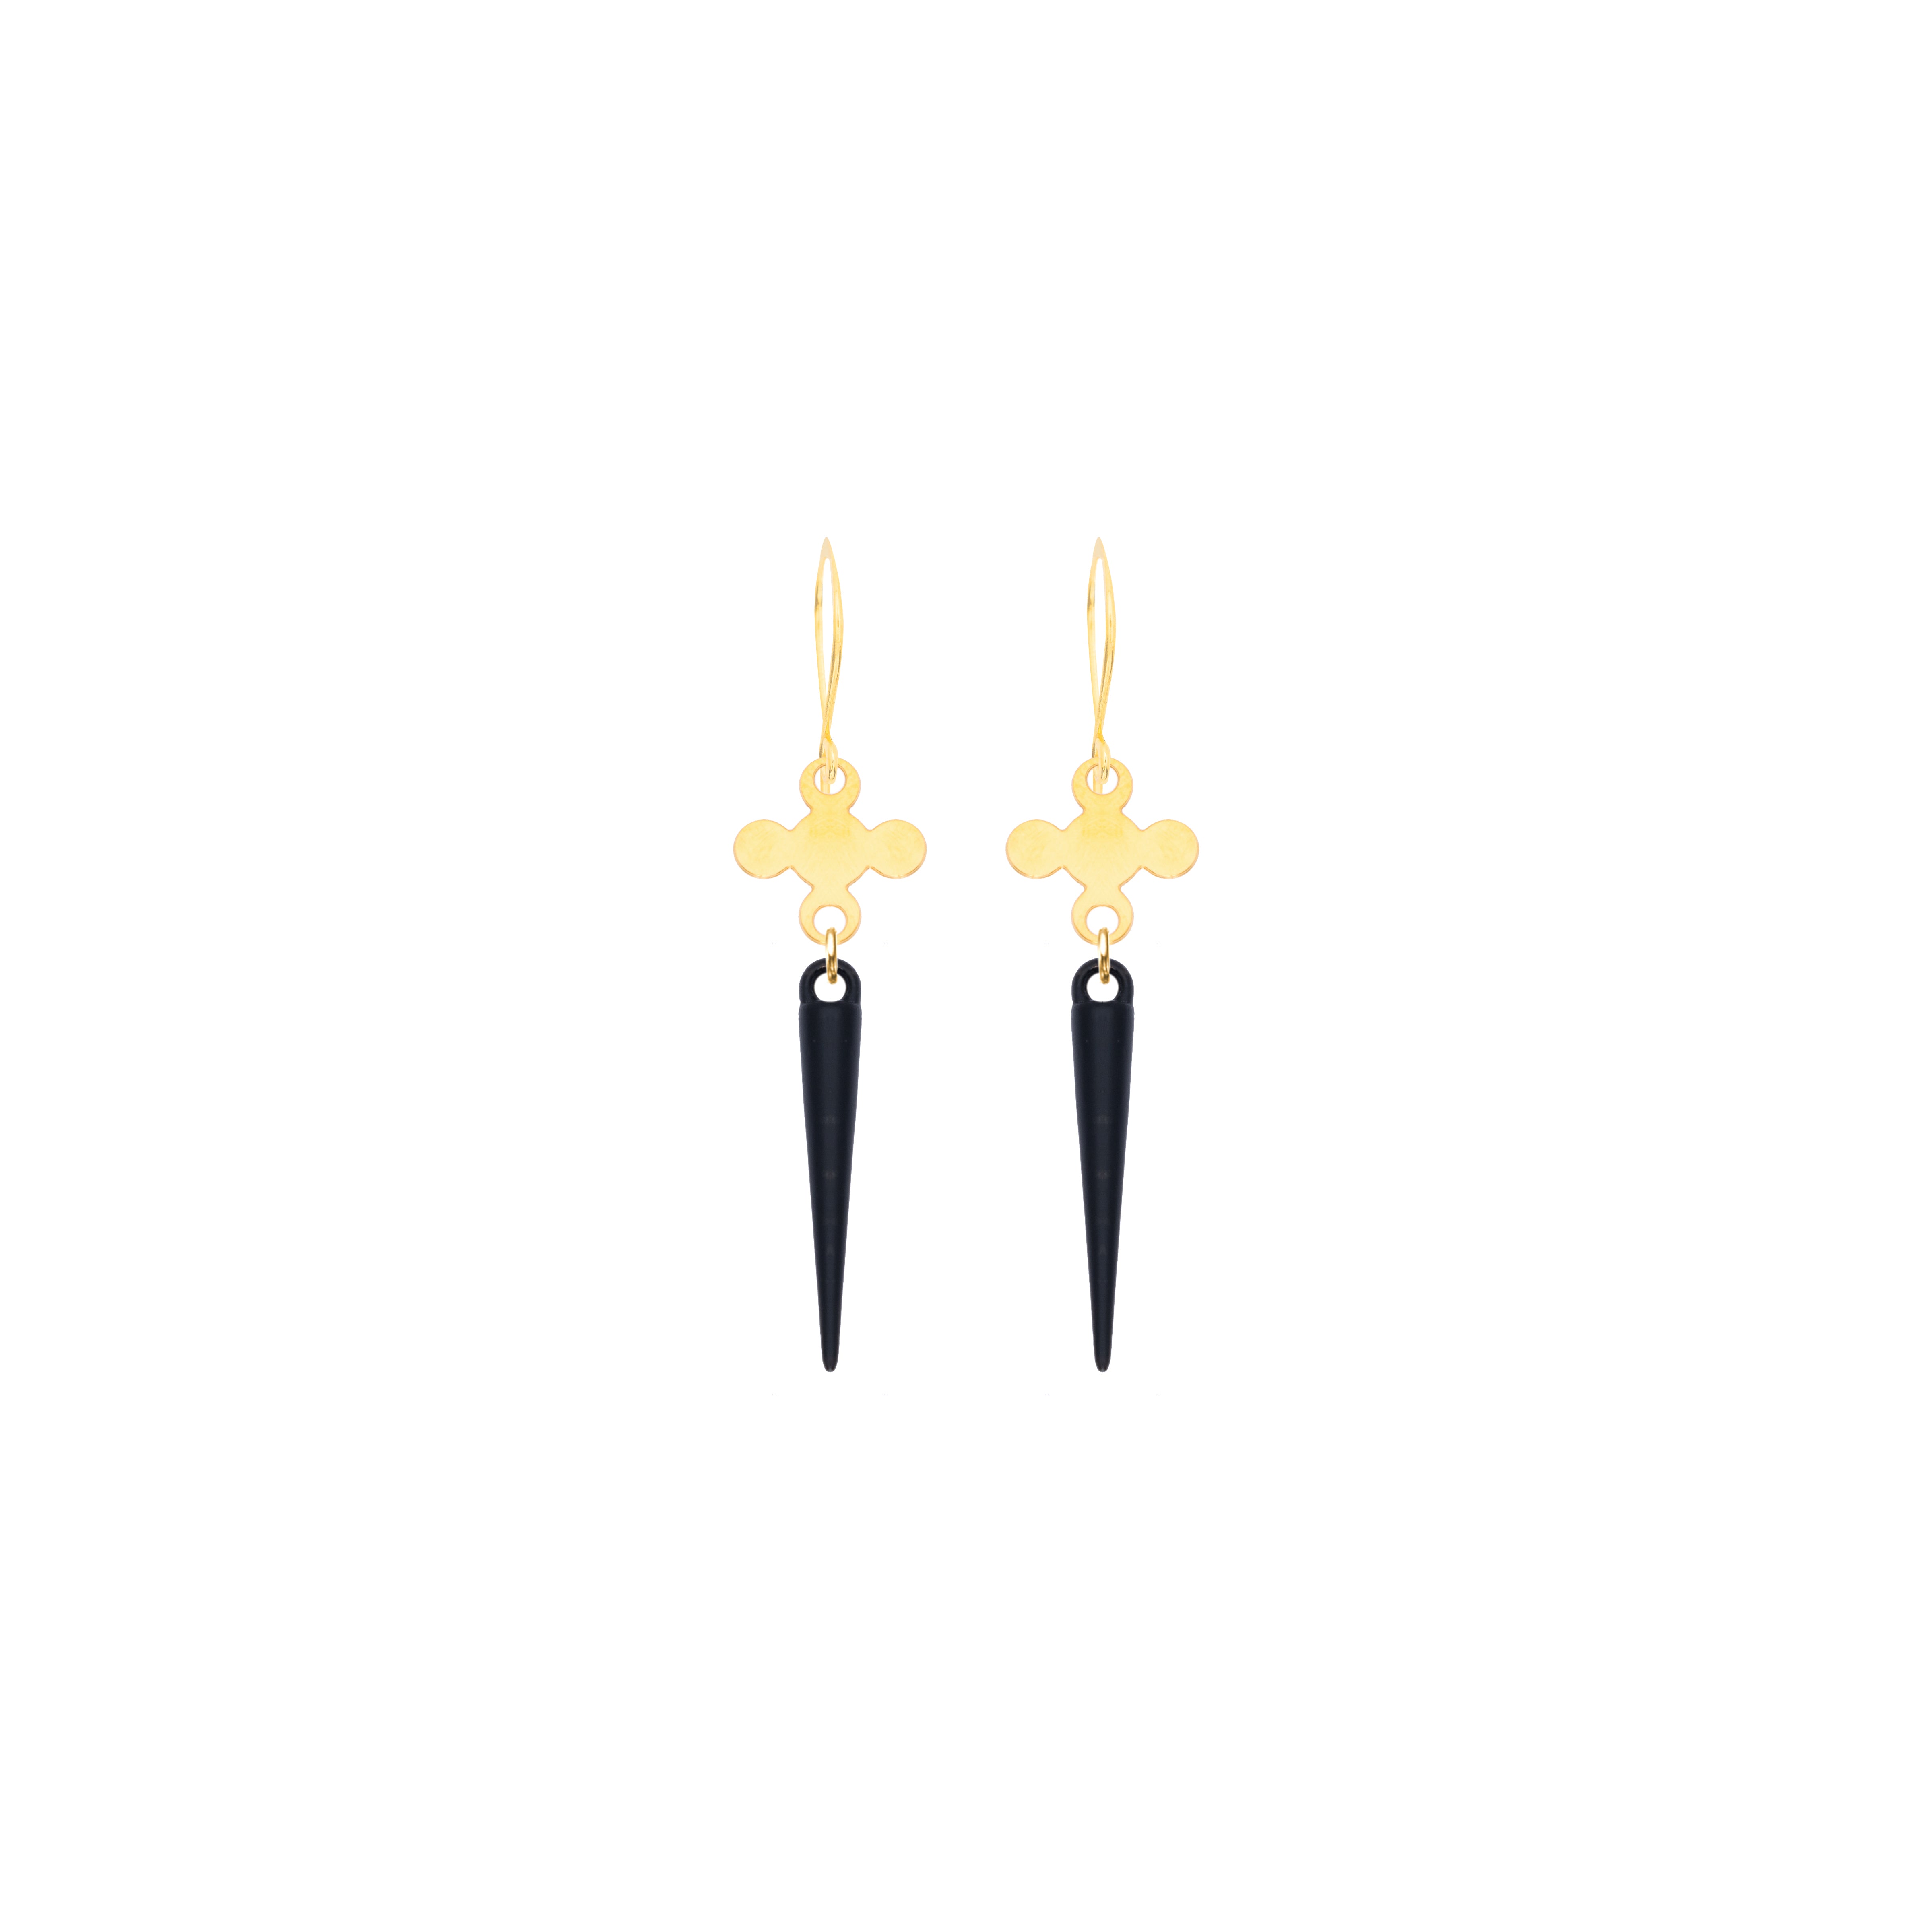 gold quatrefoil earrings with spikes